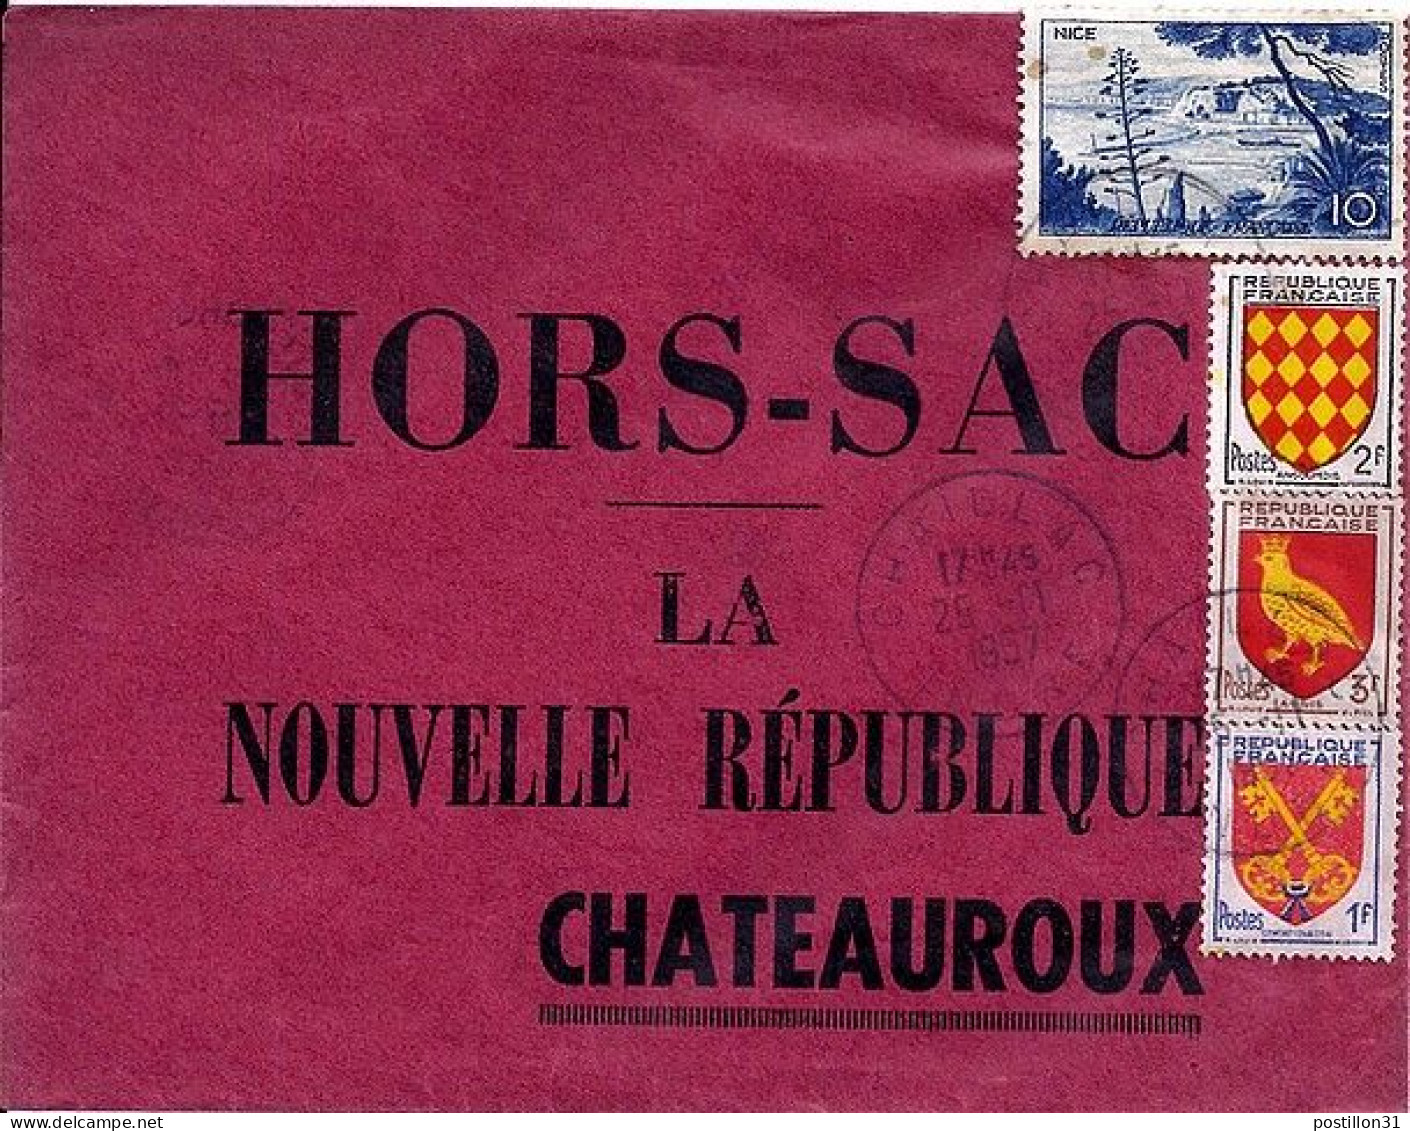 FRANCE N° 1038/1003/1004/1047 S/L. HORS SAC DE CHAILLAC/25.11.57 - Covers & Documents